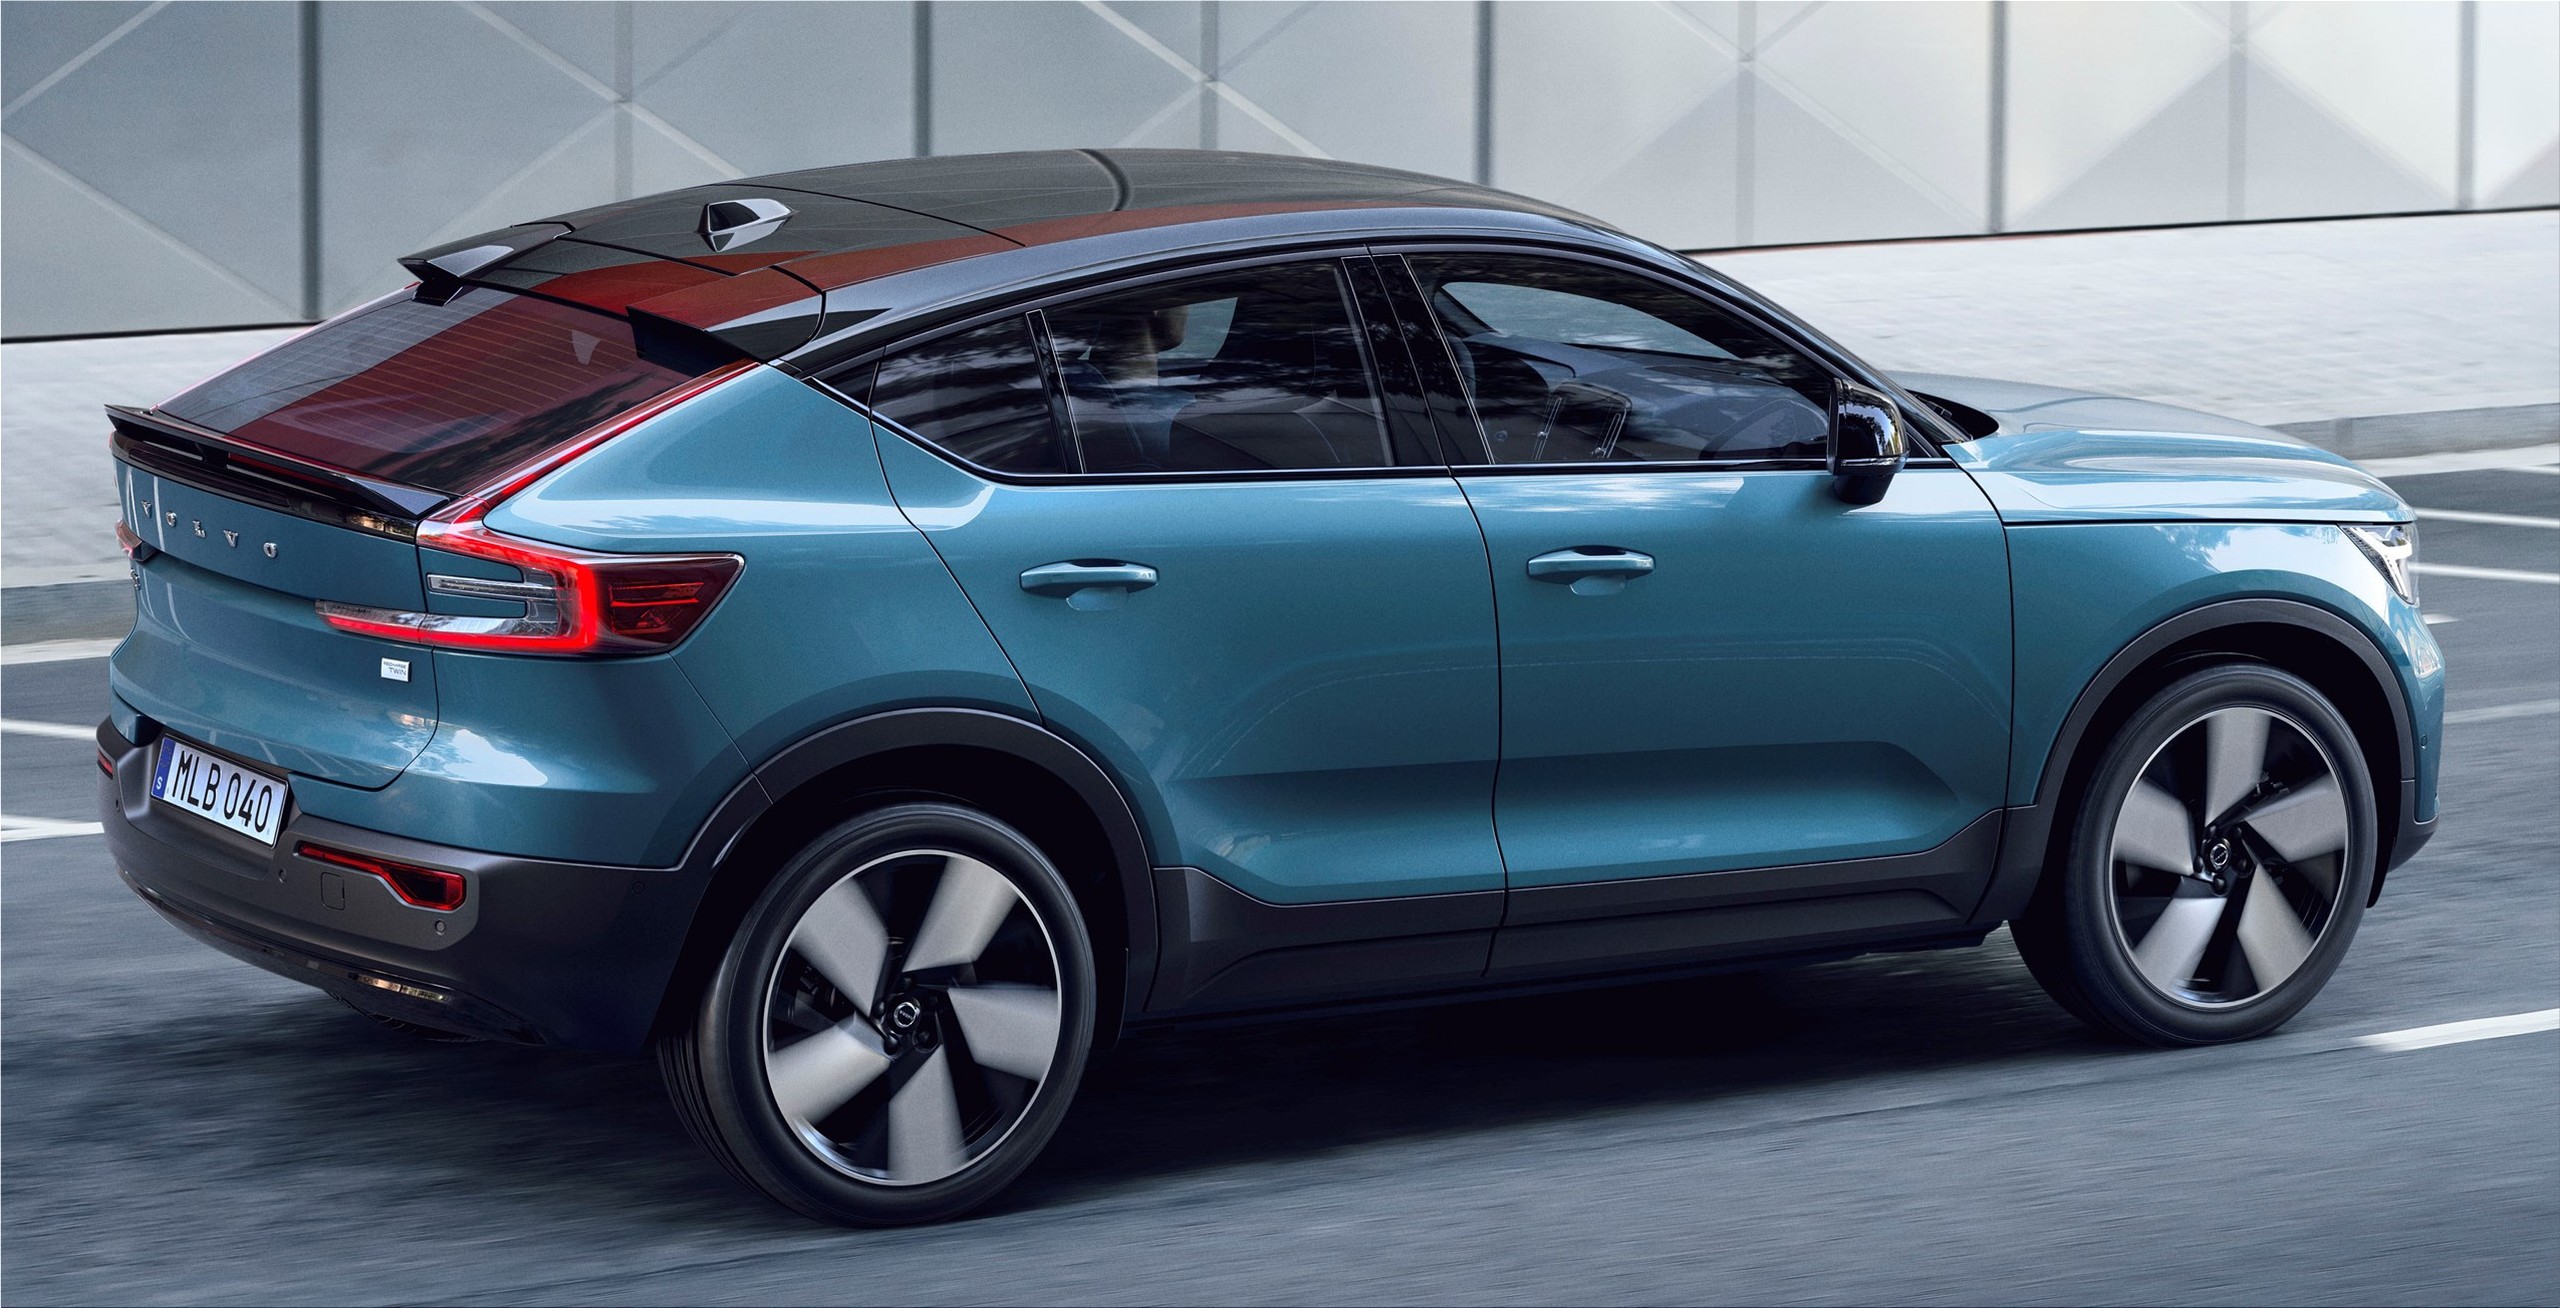 The new Volvo C40 Recharge Pure Electric is available for 57,800 euros